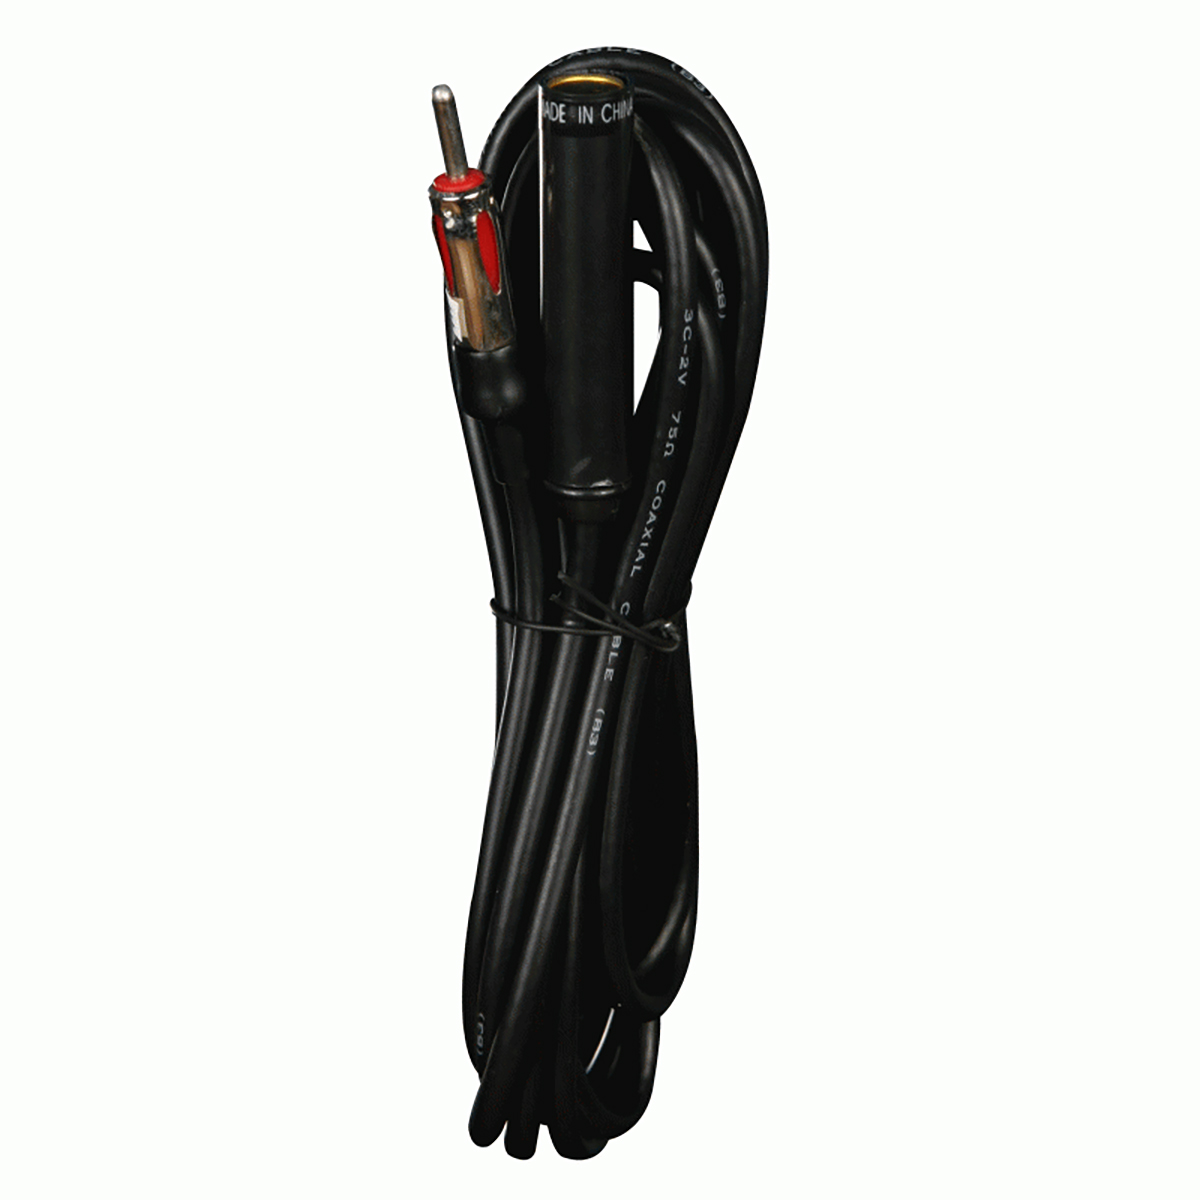 120 INCH EXTENSION CABLE WITH CAPACITOR